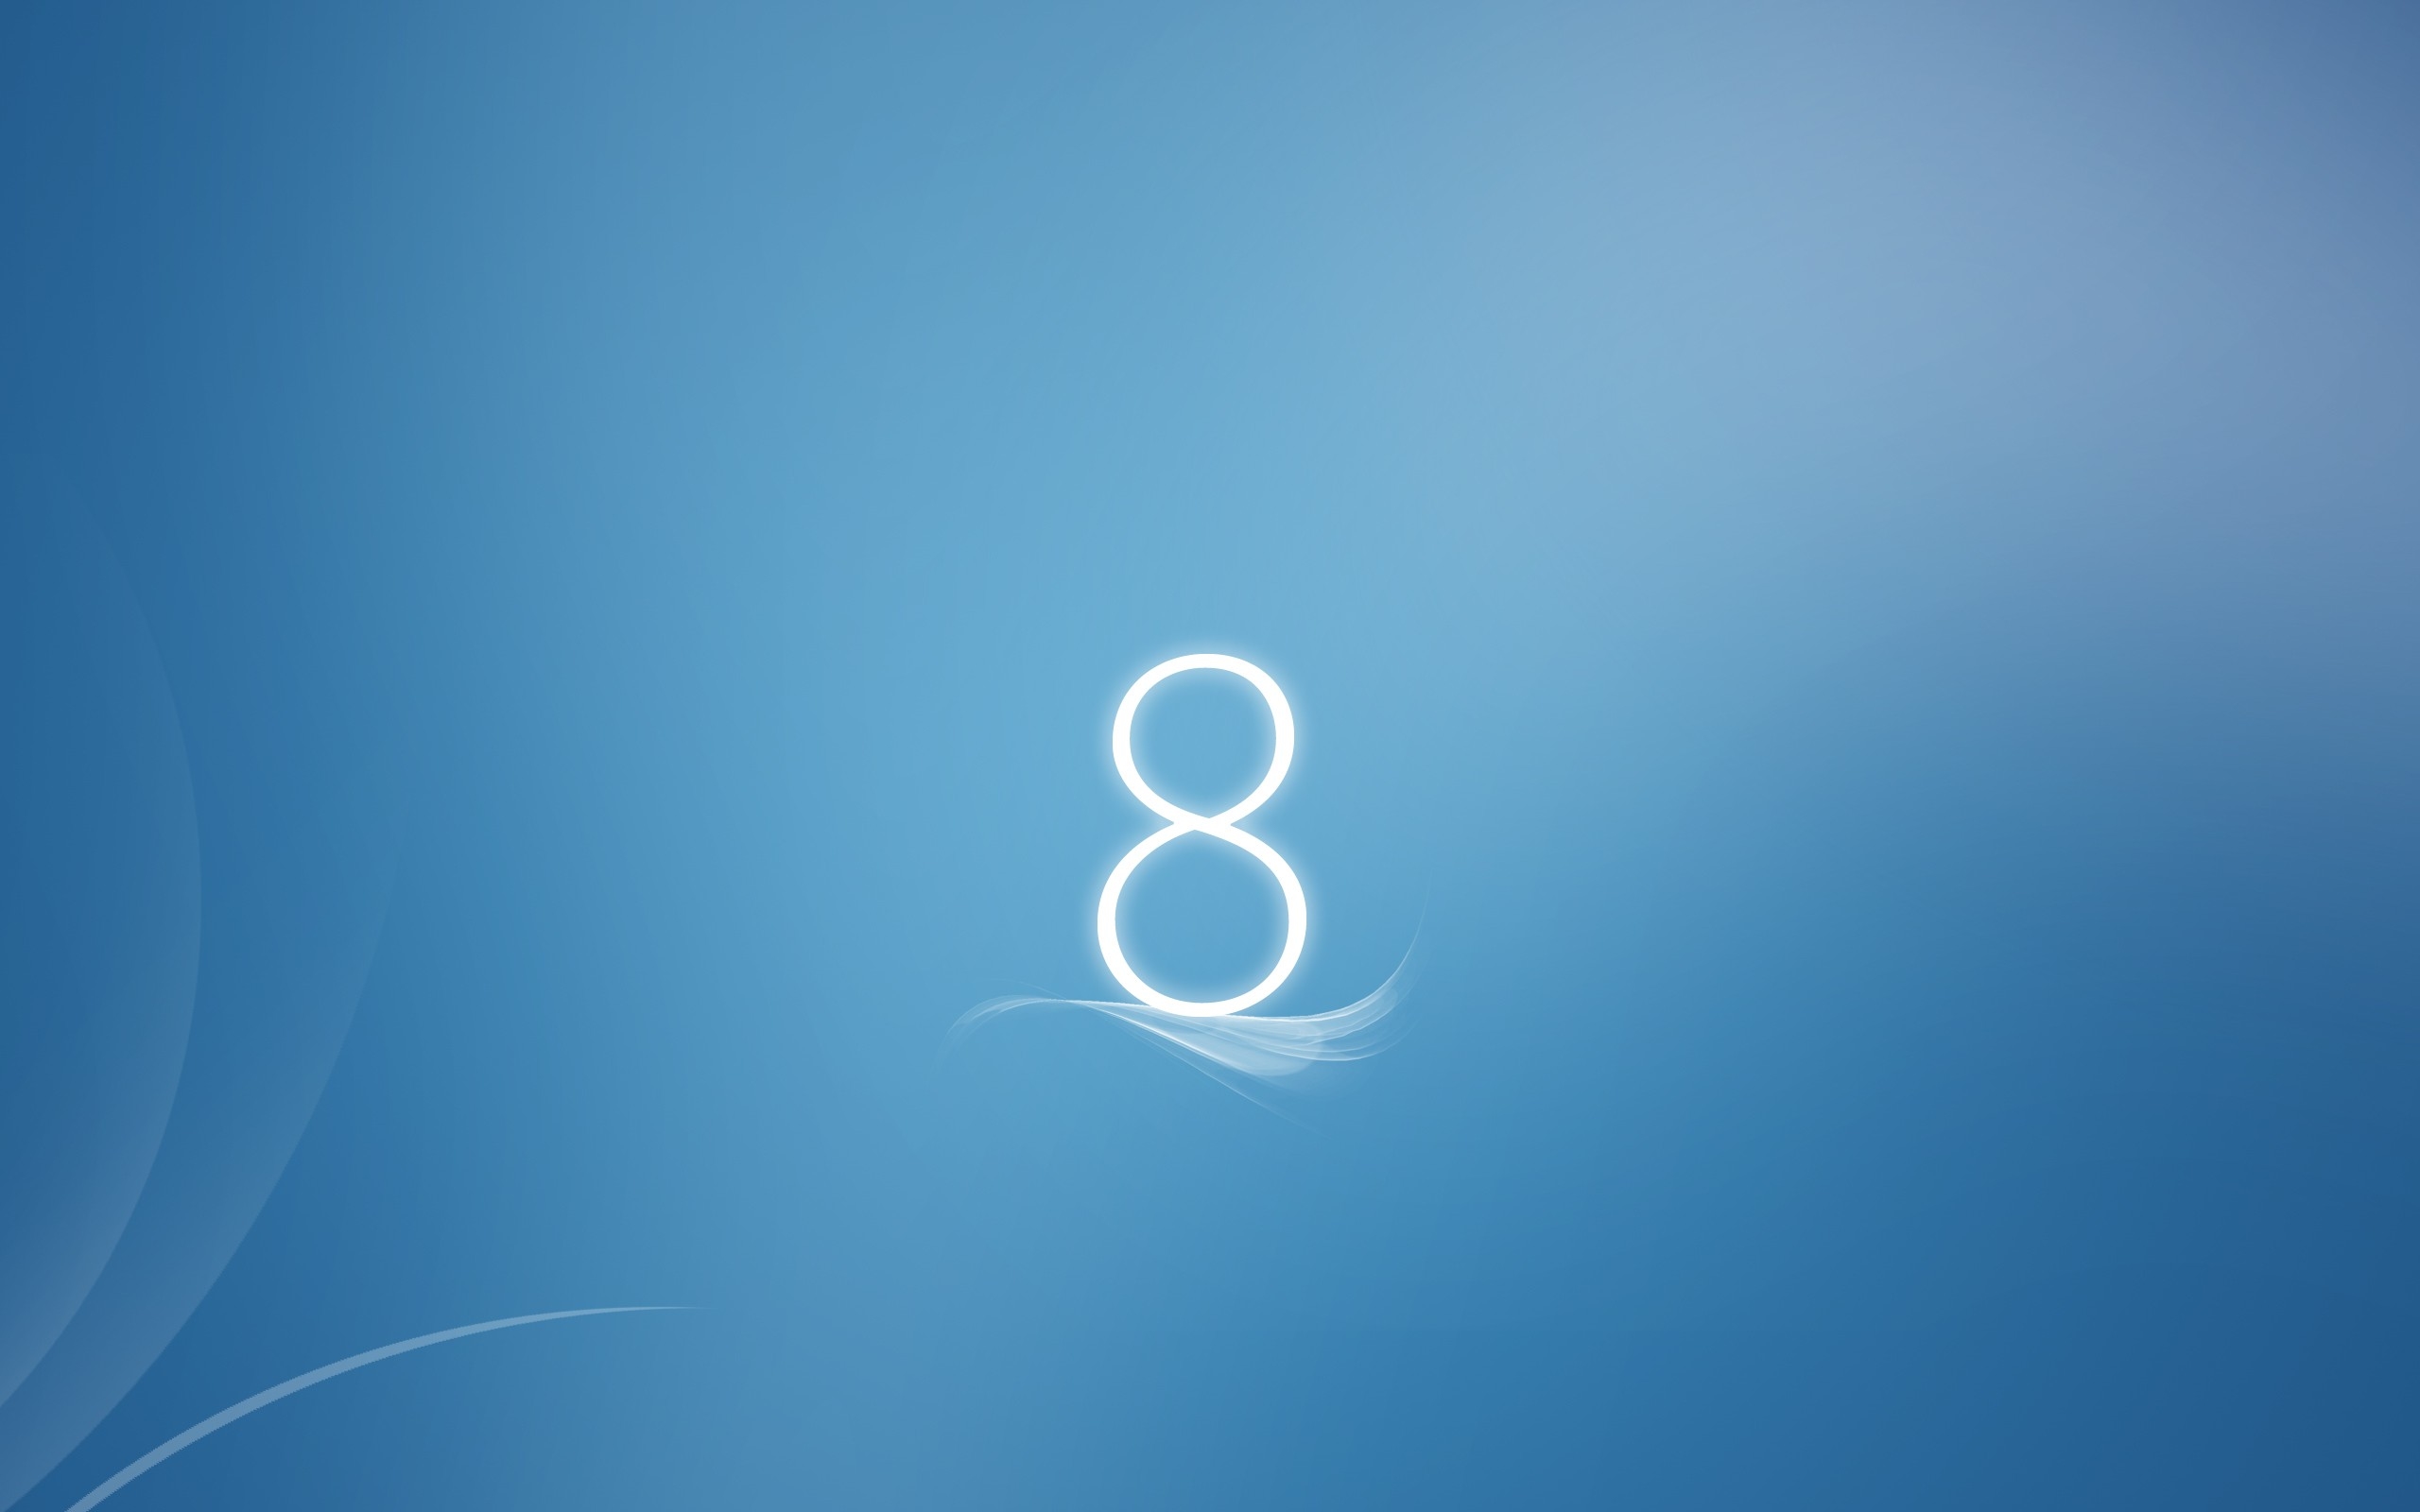 Windows 8 images windows 8 smooth blue HD wallpaper and background 